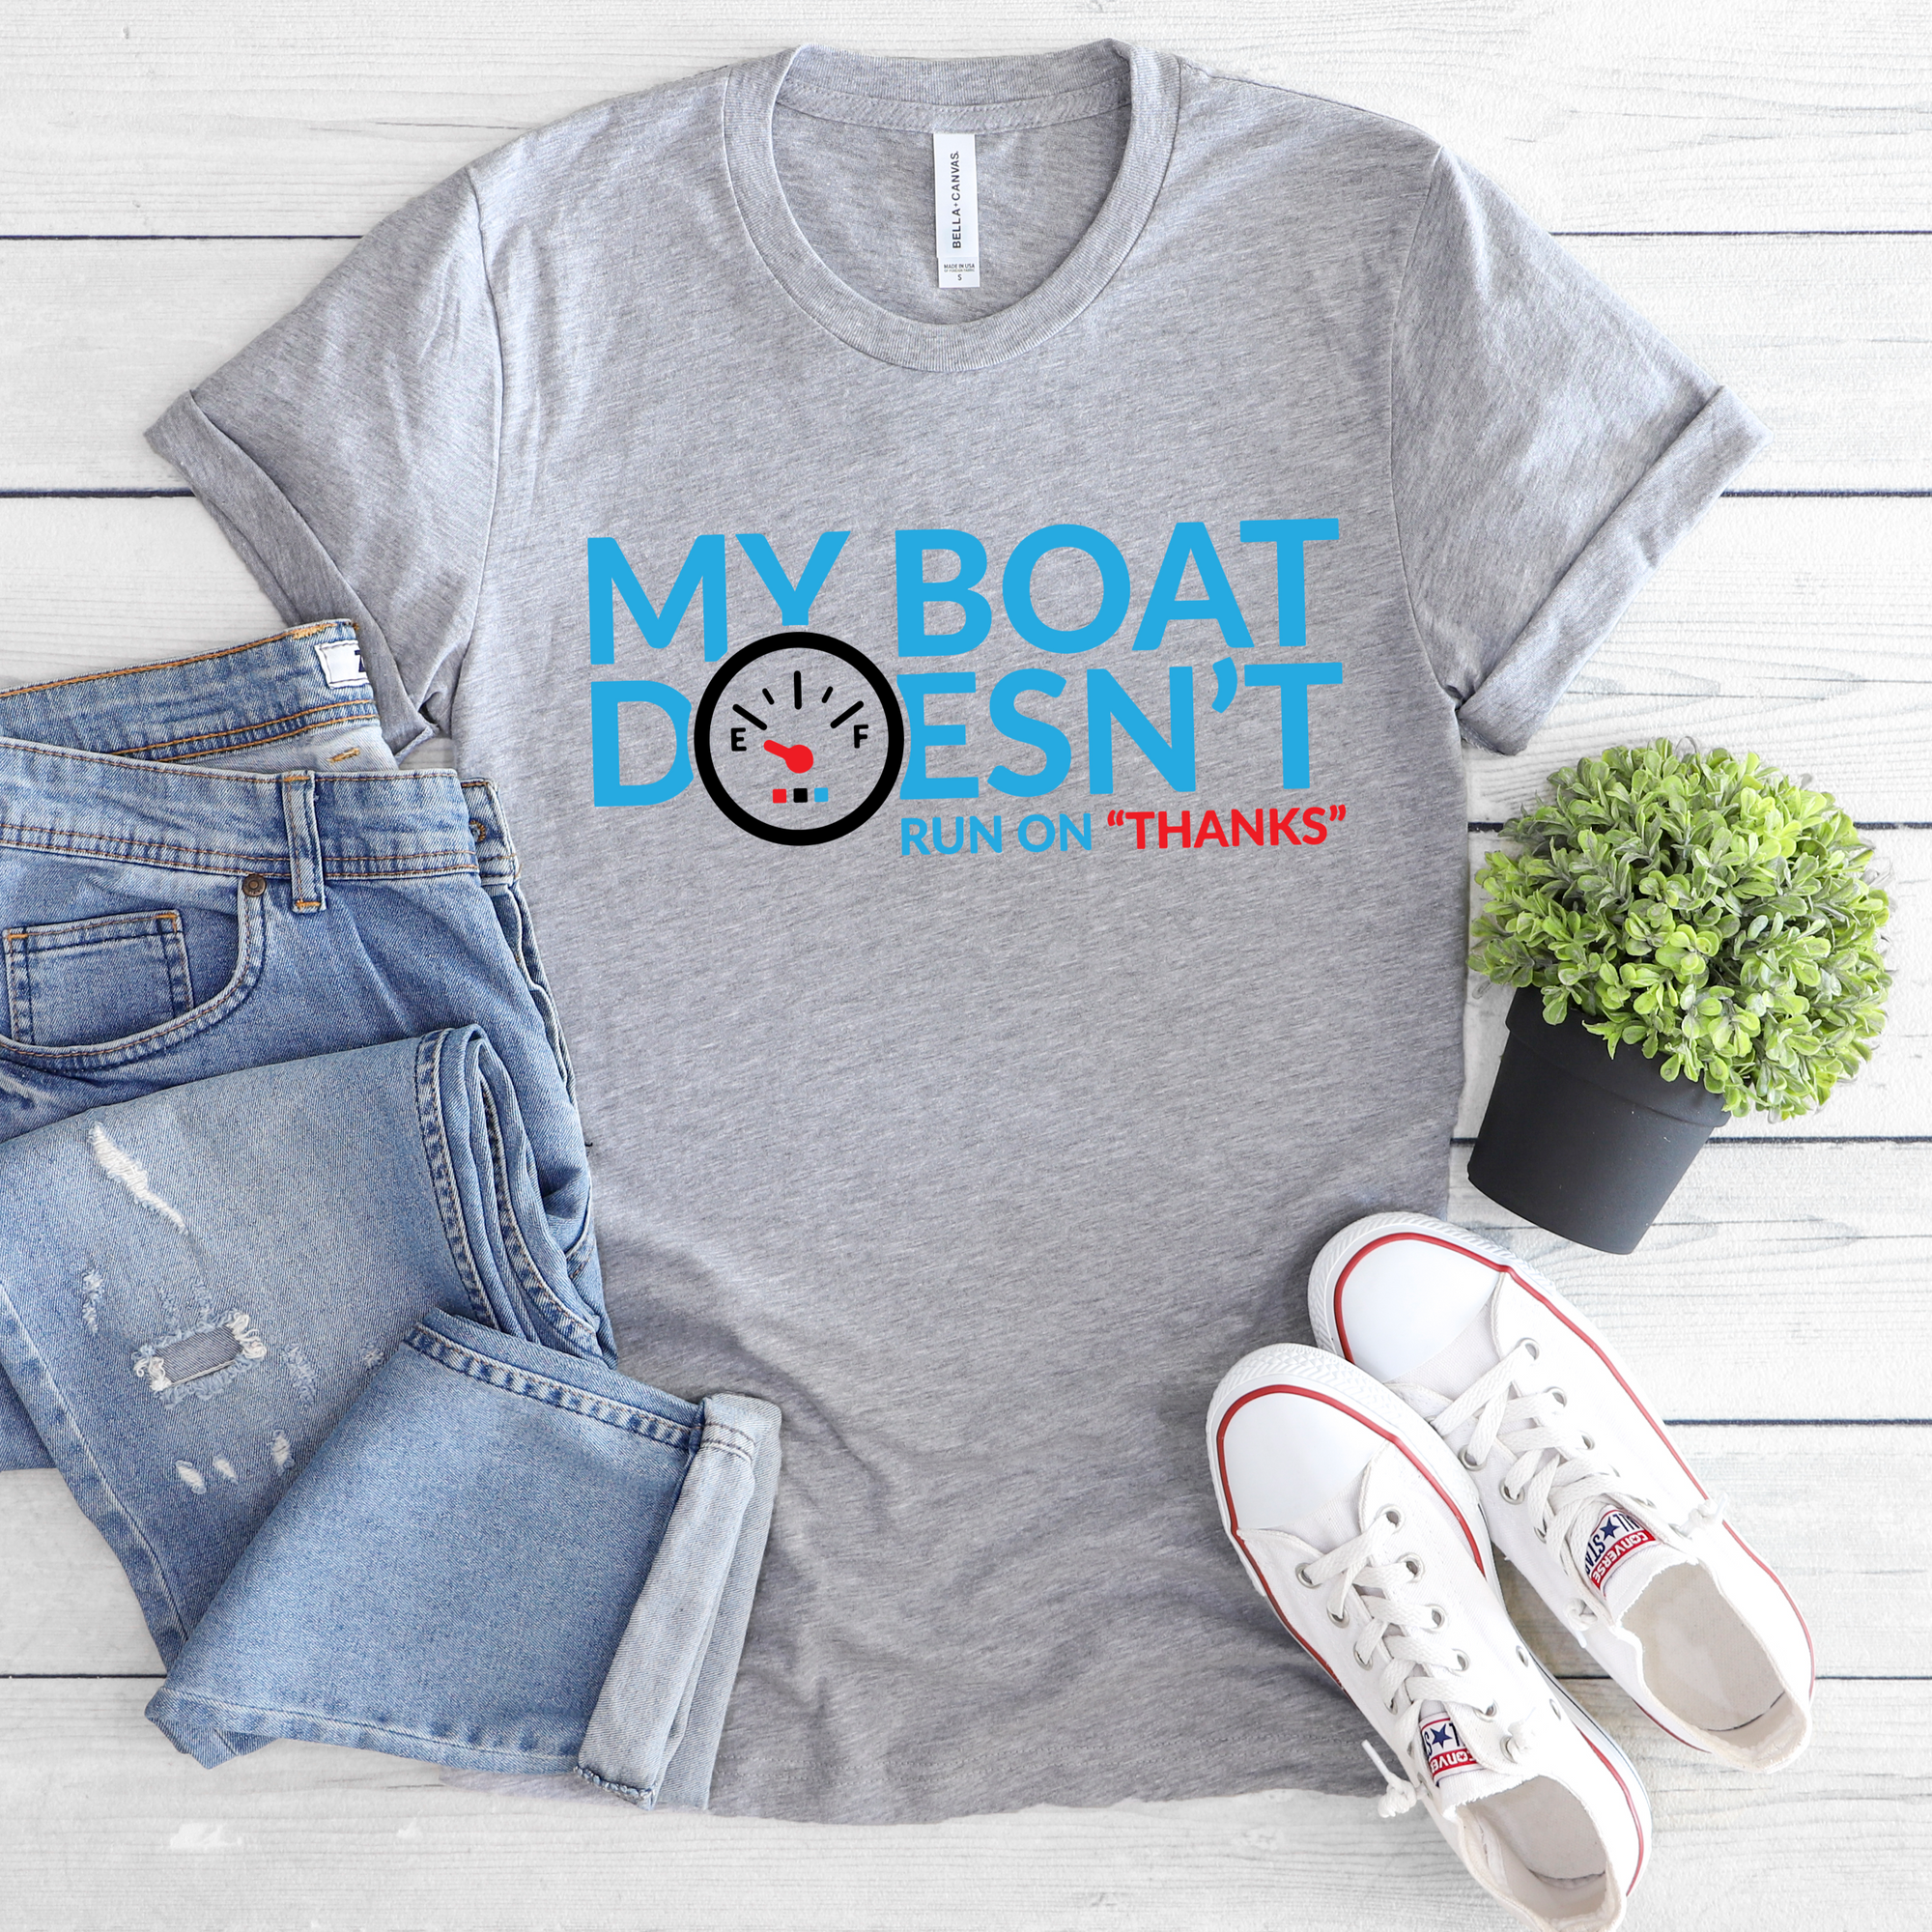 My Boat Doesn't Run on Thanks Tee or Tank